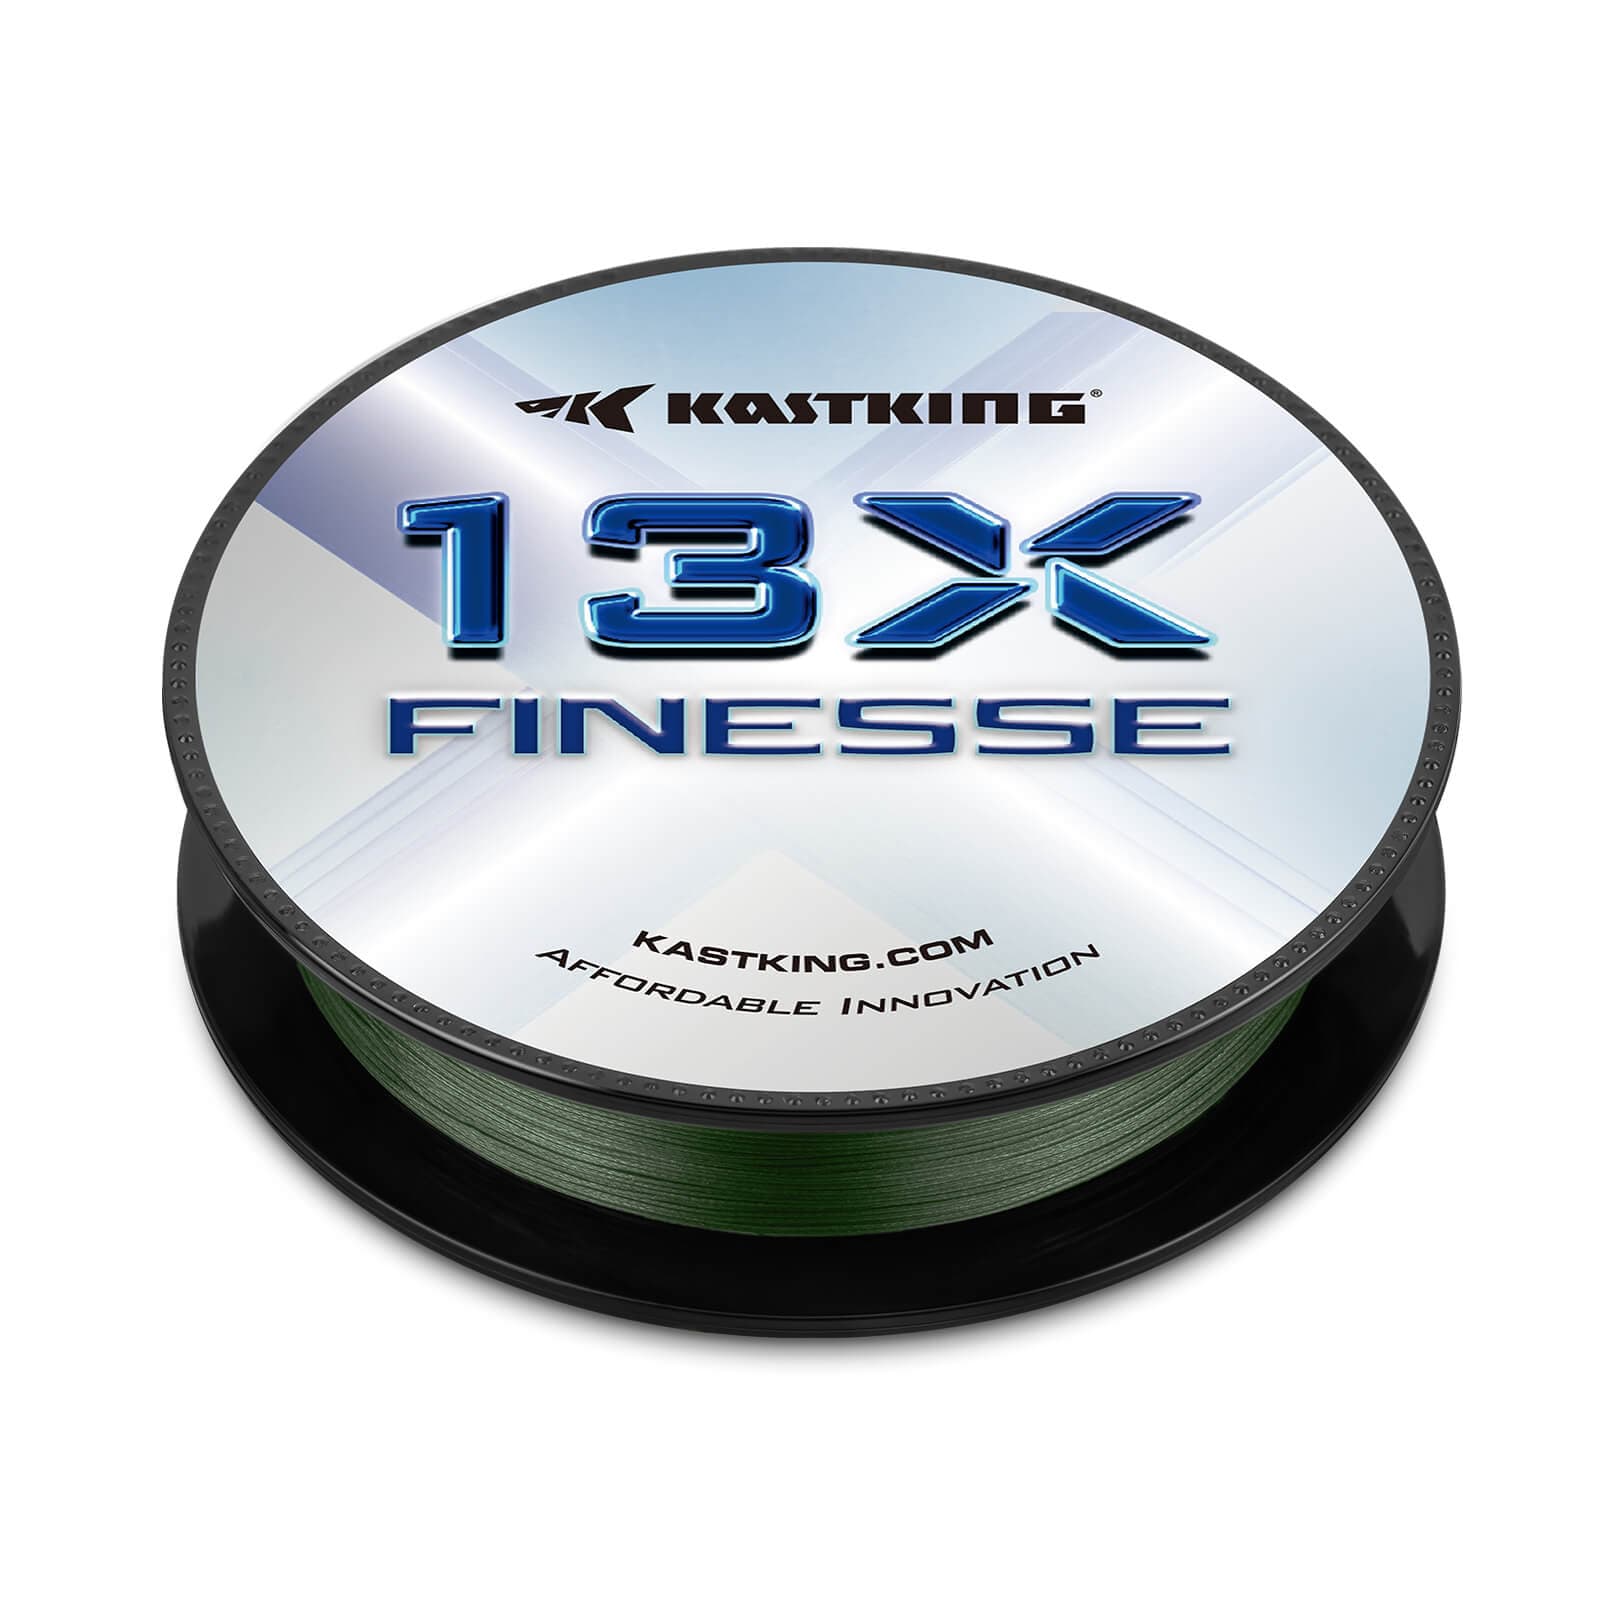 Kast King 13X Finesse Braided Fishing Line , Up to 21% Off — CampSaver